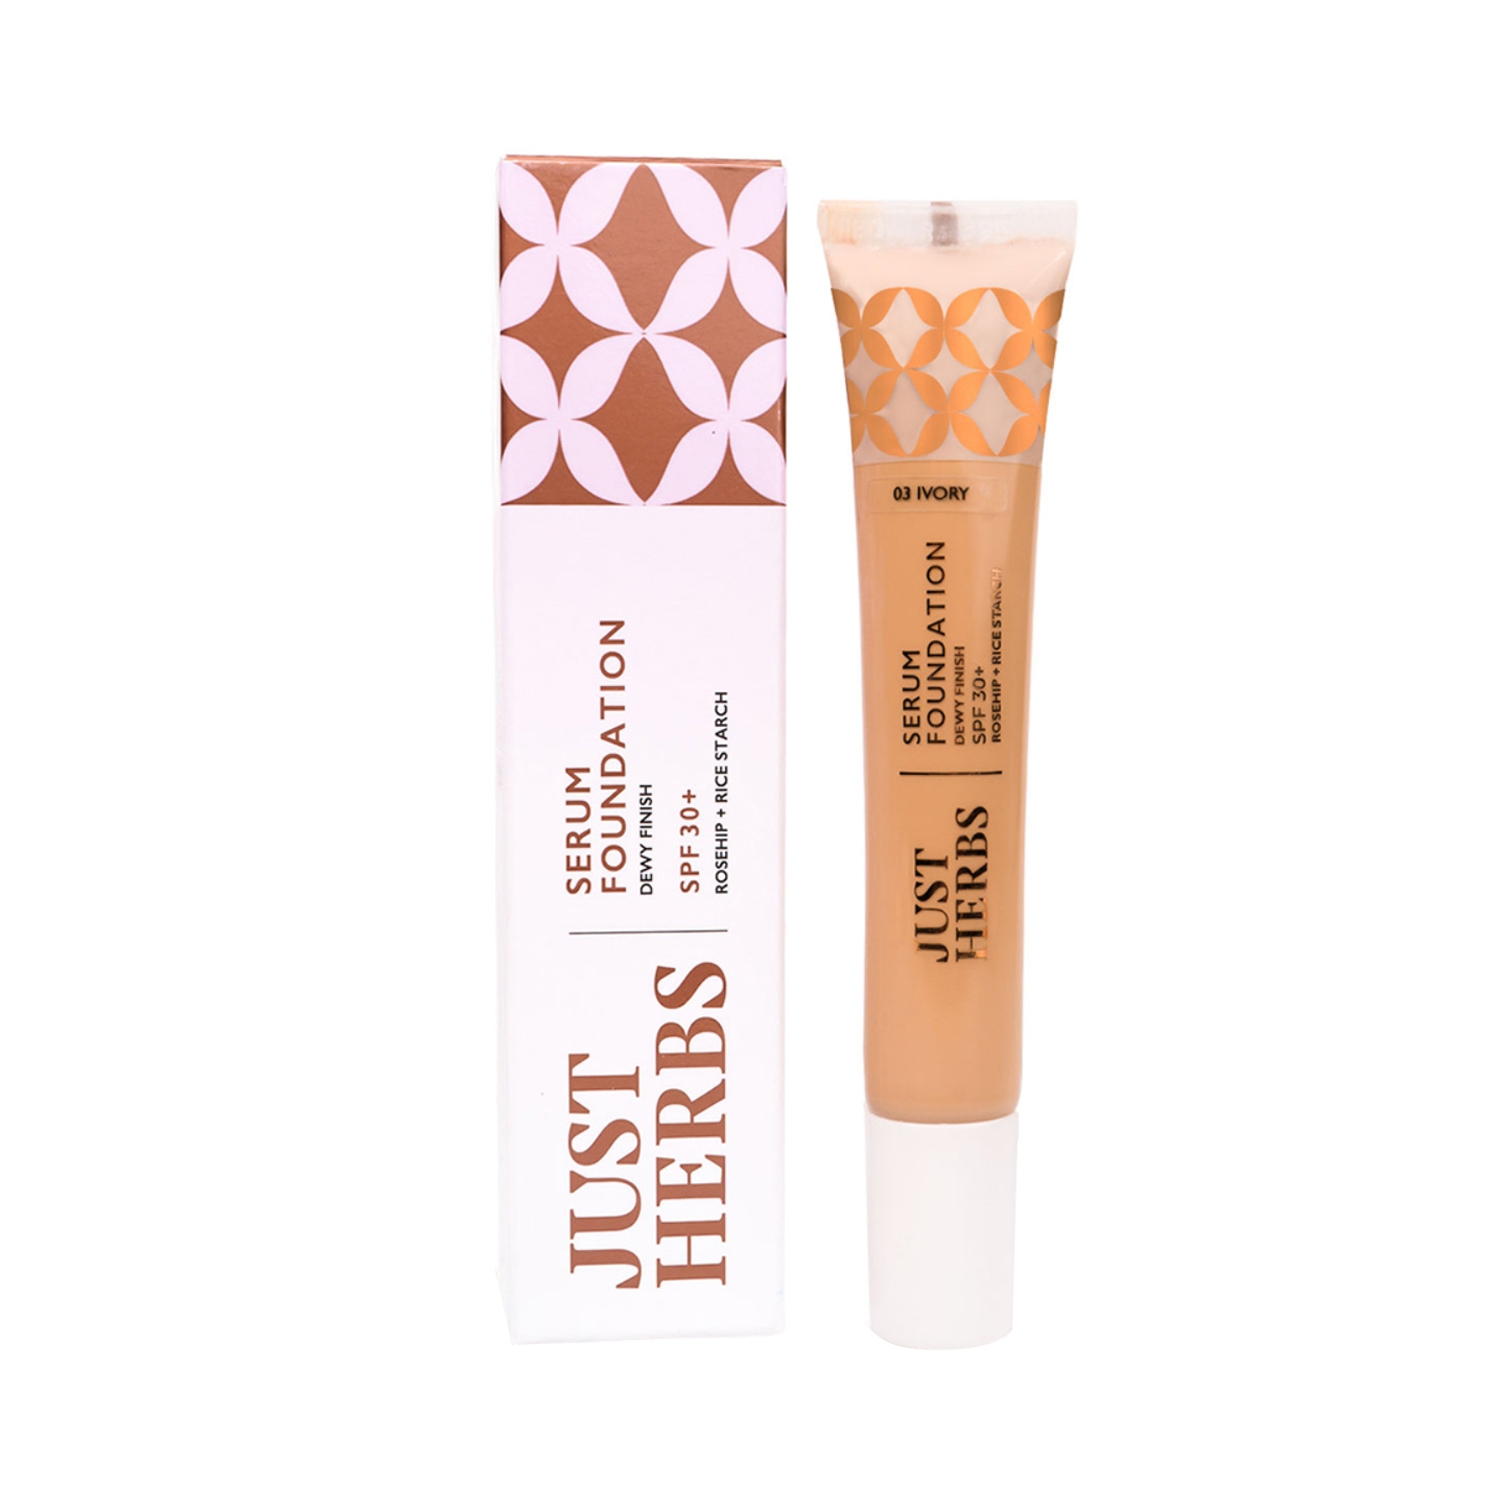 Just Herbs | Just Herbs Serum Foundation Dewy Finish SPF 30+ With Rosehip & Rice Starch - 03 Ivory (20ml)